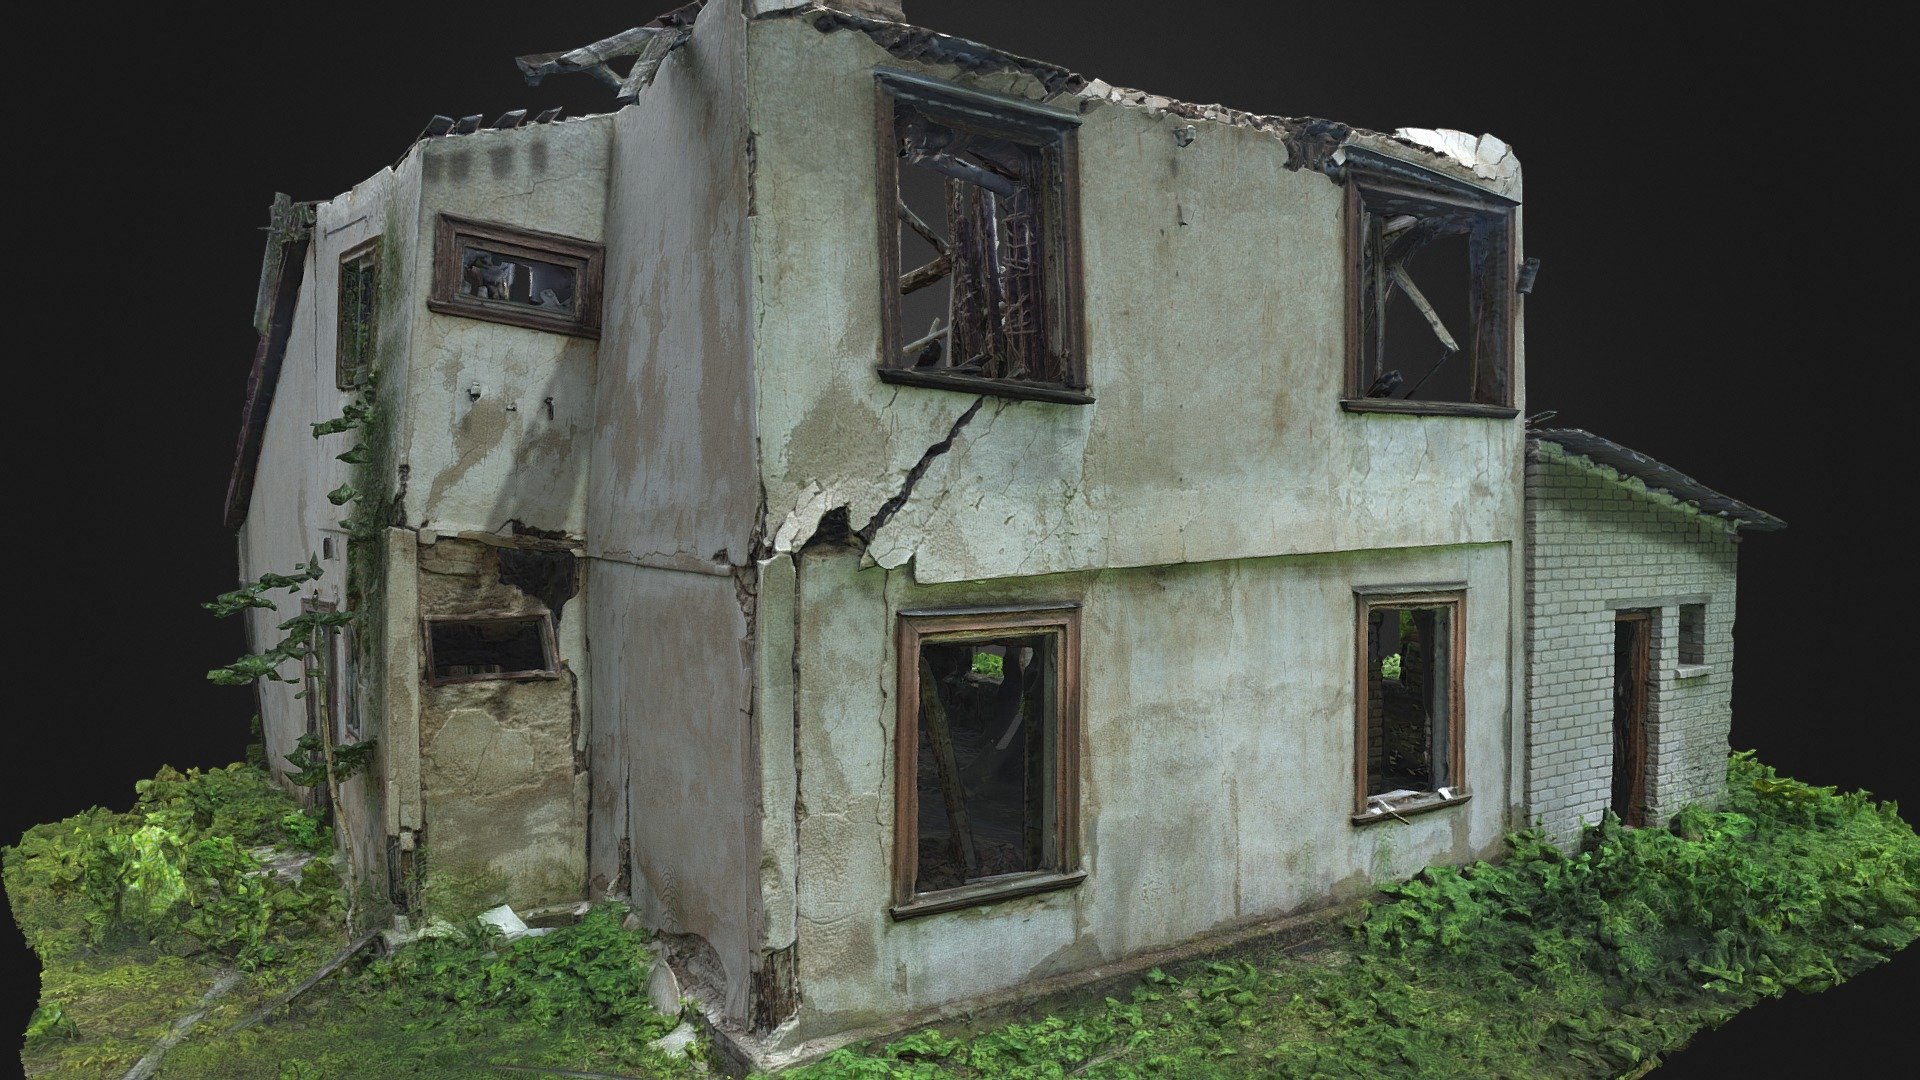 3D scan of and old brick house in the middle of a field. 

No glass in windows, walls barely holding together, collapsed roof.

With normal map 3d model